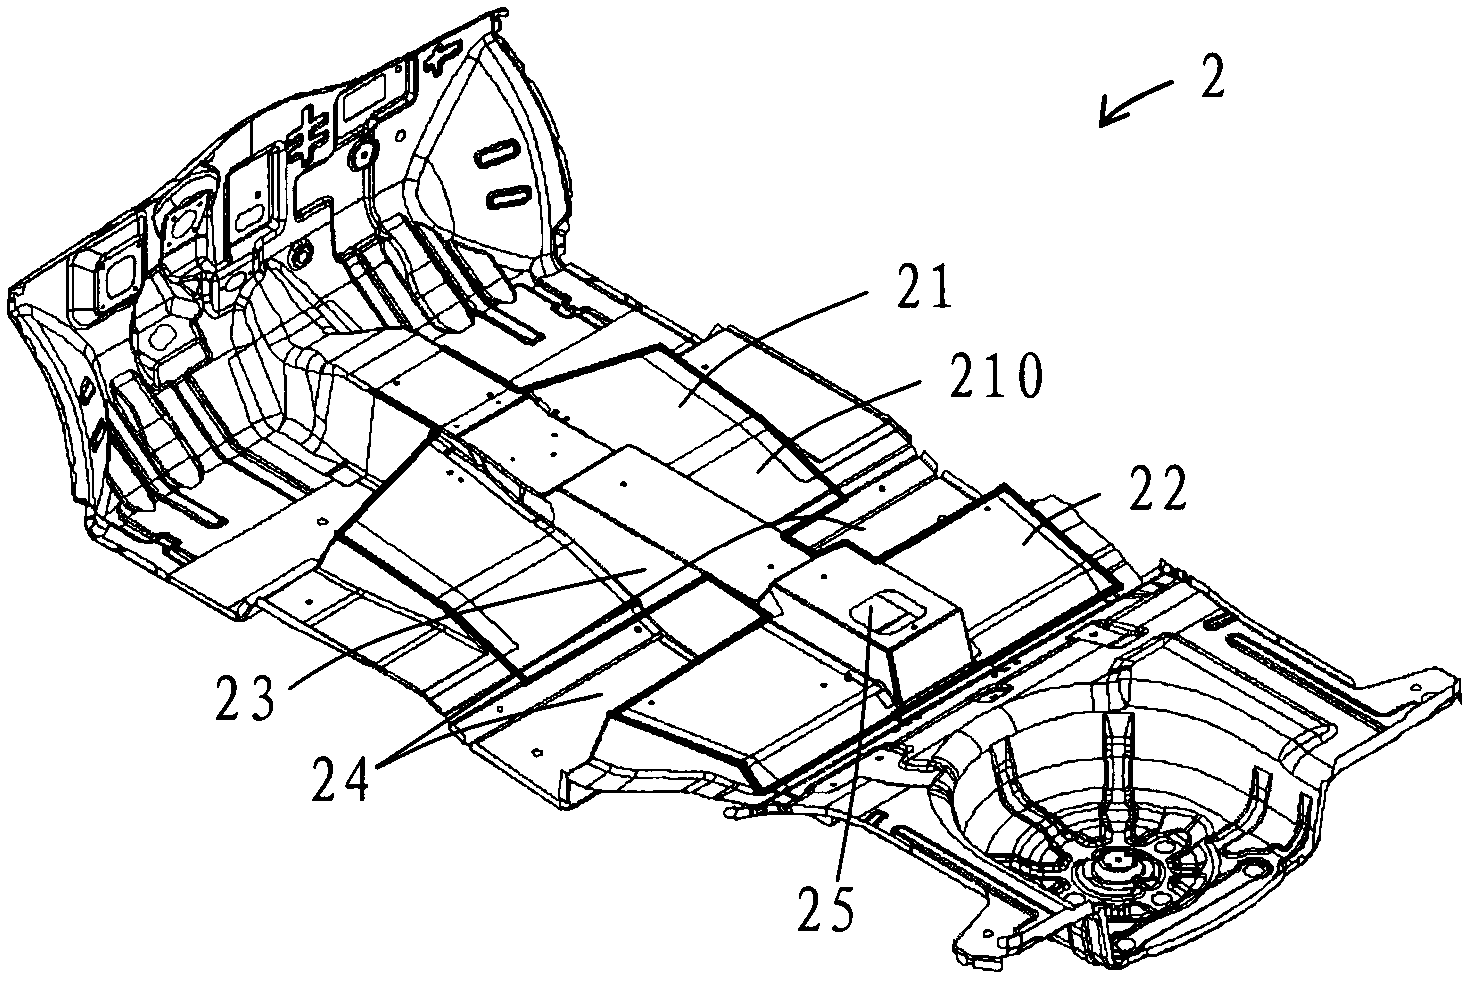 Battery box for vehicle, vehicle body component and automobile